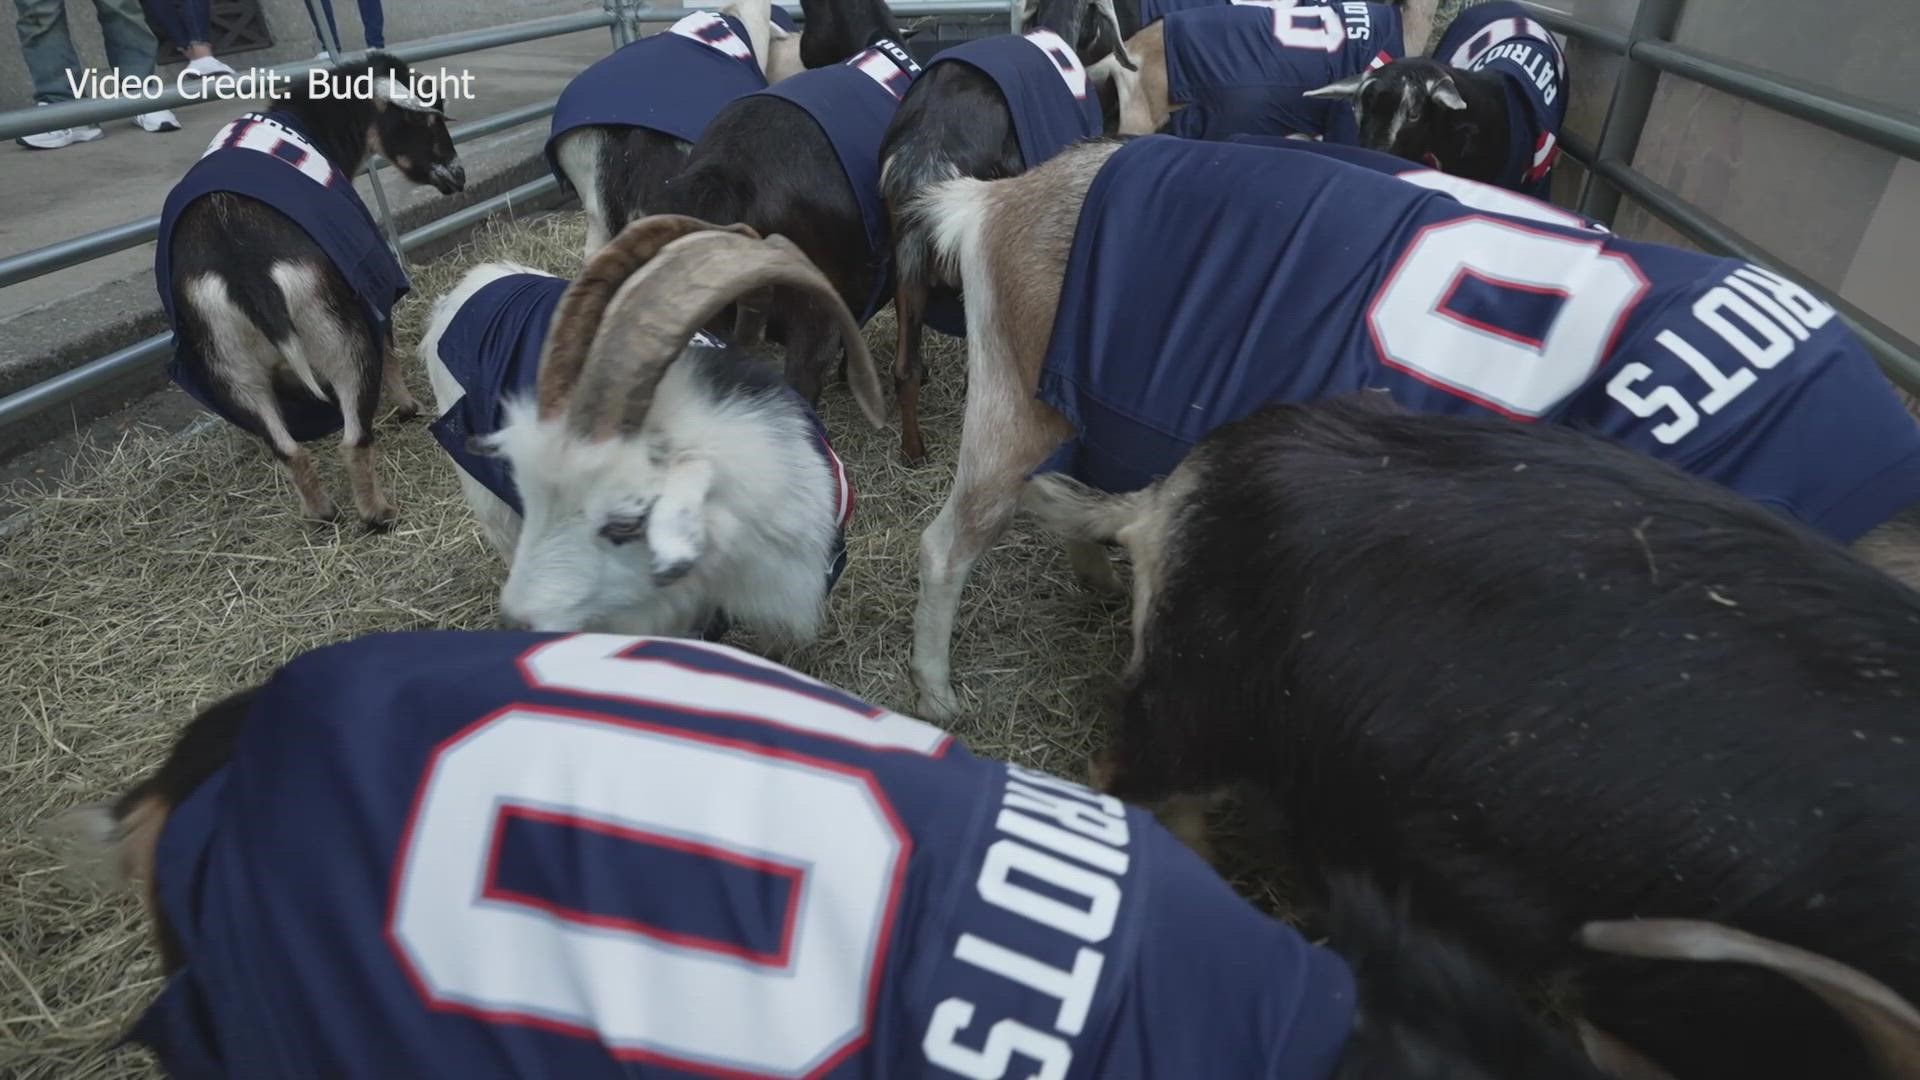 Goats in Patriots jerseys took to the streets of Boston ahead of Tom Brady's return Sunday.